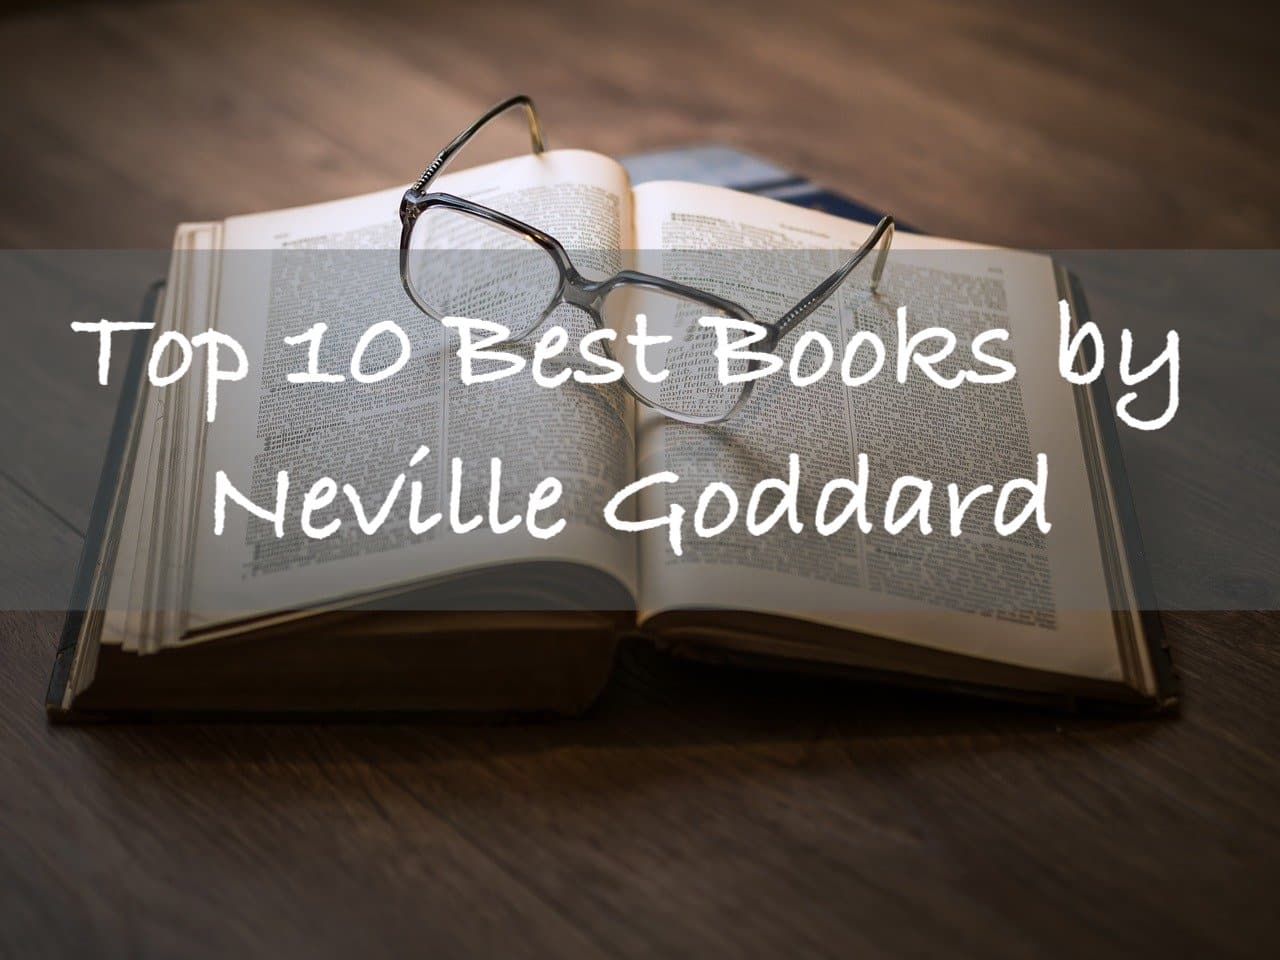 You are currently viewing Top 10 Best Books by Neville Goddard